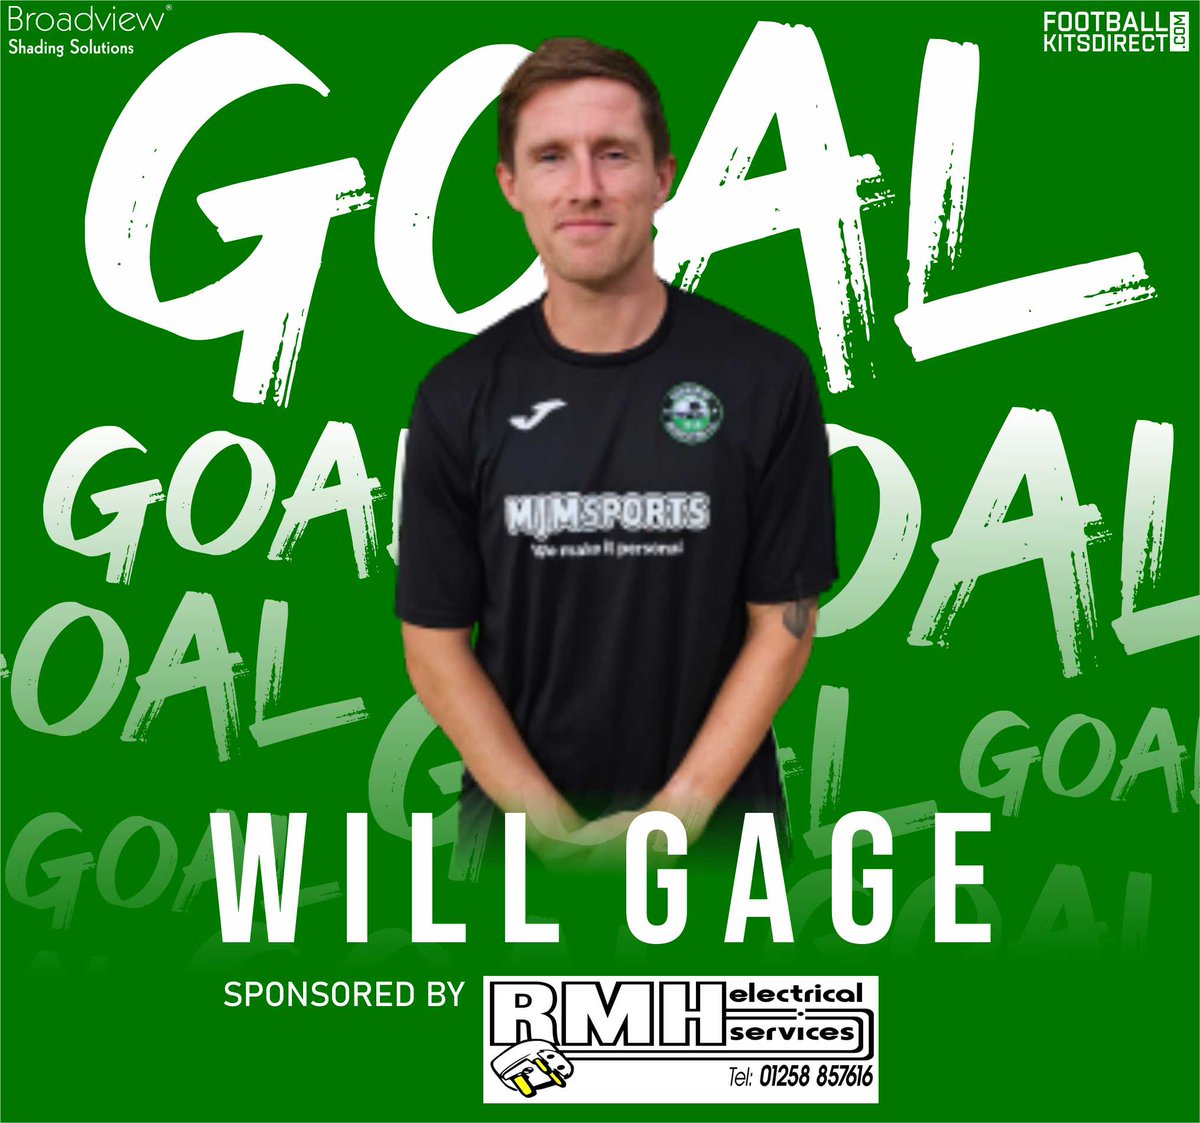 GOOALLLL ⚽️ We have a 4th and it's Will Gage who gets it!! 🔴 0-4 🟢